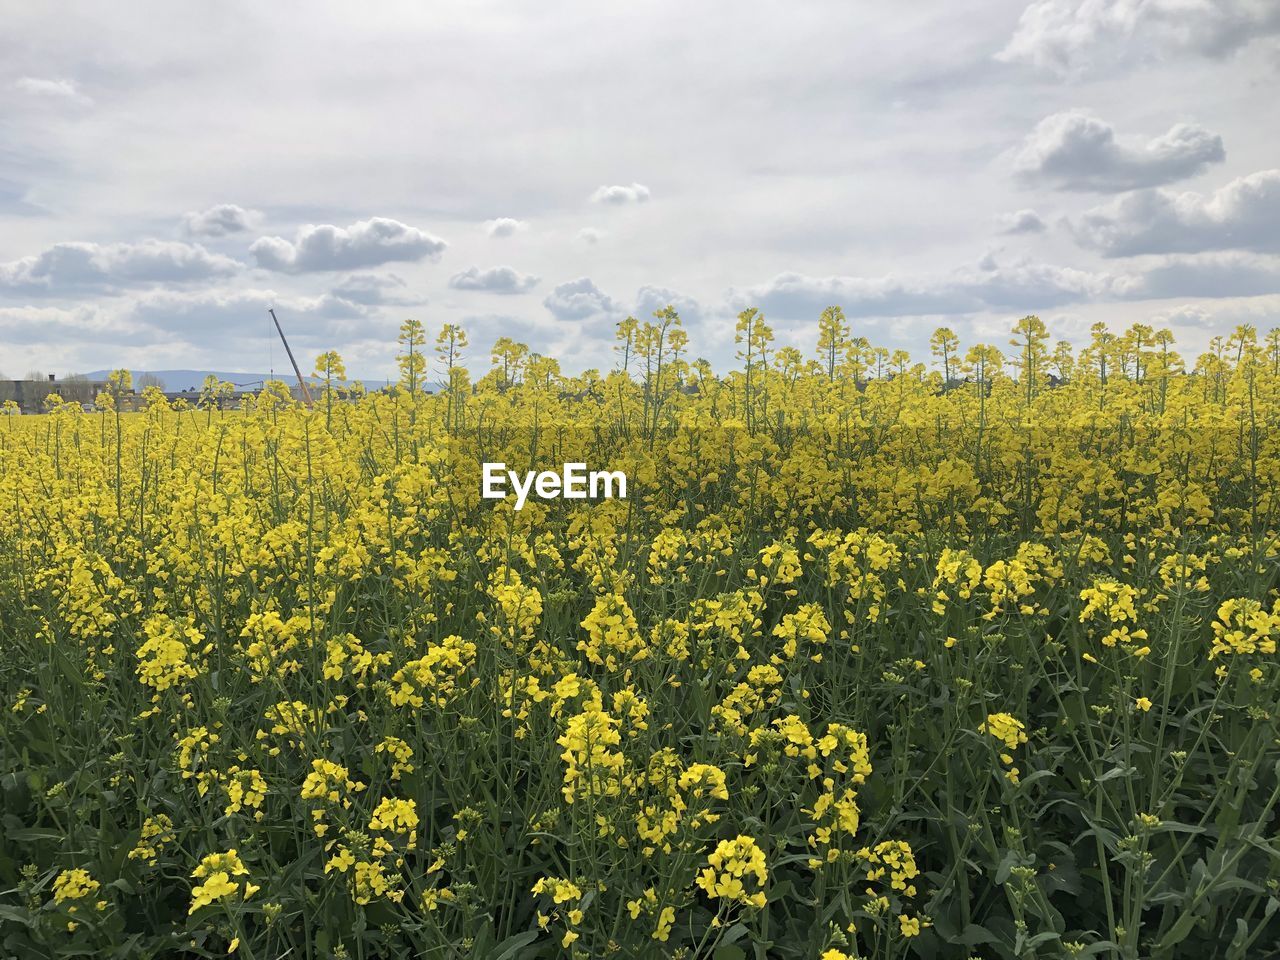 landscape, plant, field, rapeseed, land, yellow, flower, agriculture, environment, beauty in nature, rural scene, canola, vegetable, sky, flowering plant, produce, growth, crop, cloud, oilseed rape, food, freshness, nature, scenics - nature, farm, brassica rapa, mustard, prairie, tranquility, abundance, springtime, no people, meadow, tranquil scene, blossom, rural area, outdoors, day, fragility, idyllic, cultivated, plain, grassland, horizon over land